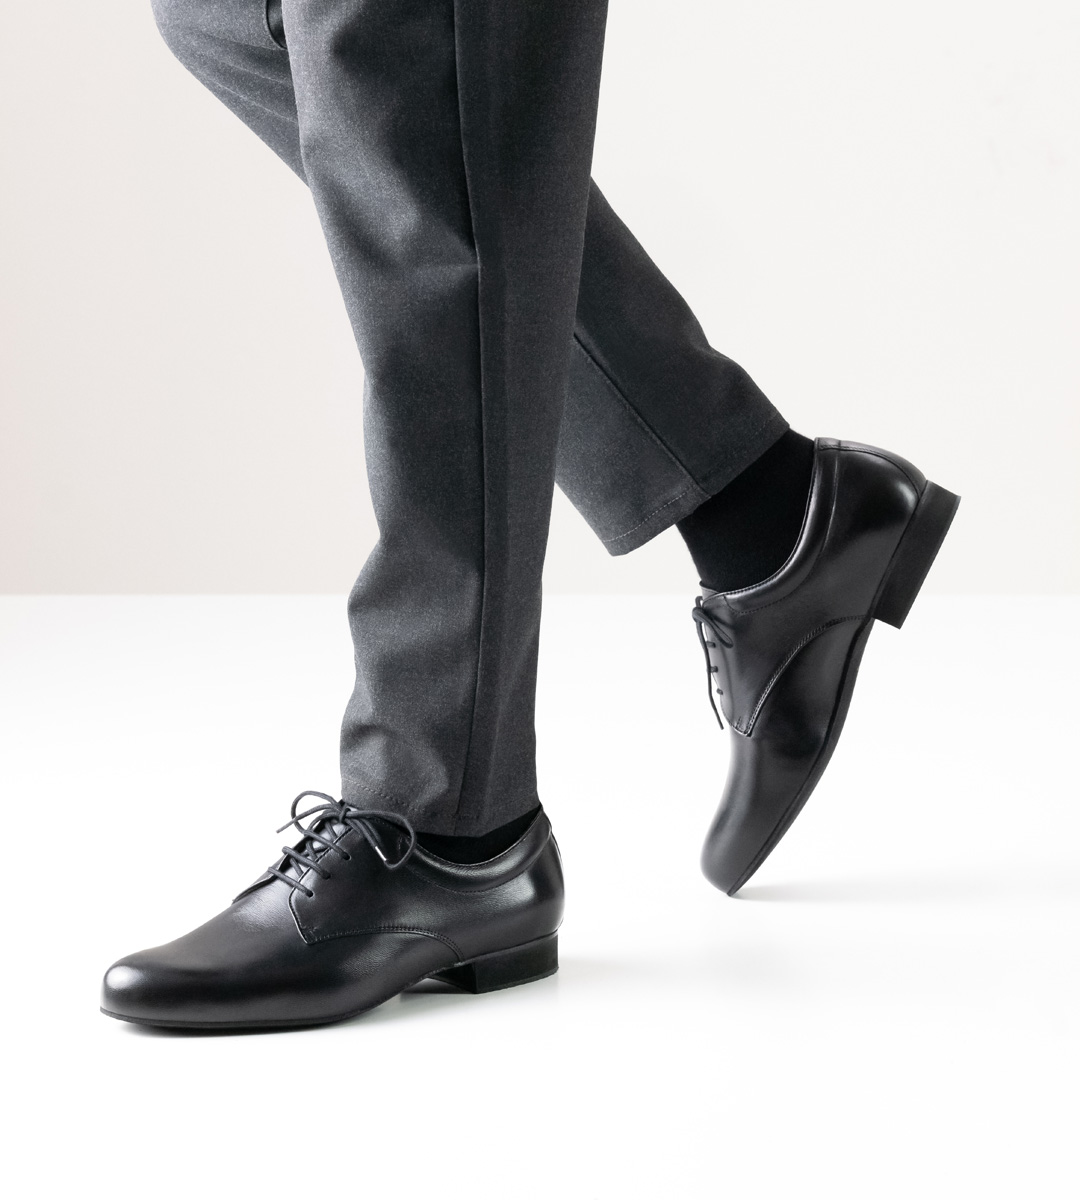 Werner Kern men's dance shoe in nappa in combination with trousers in black